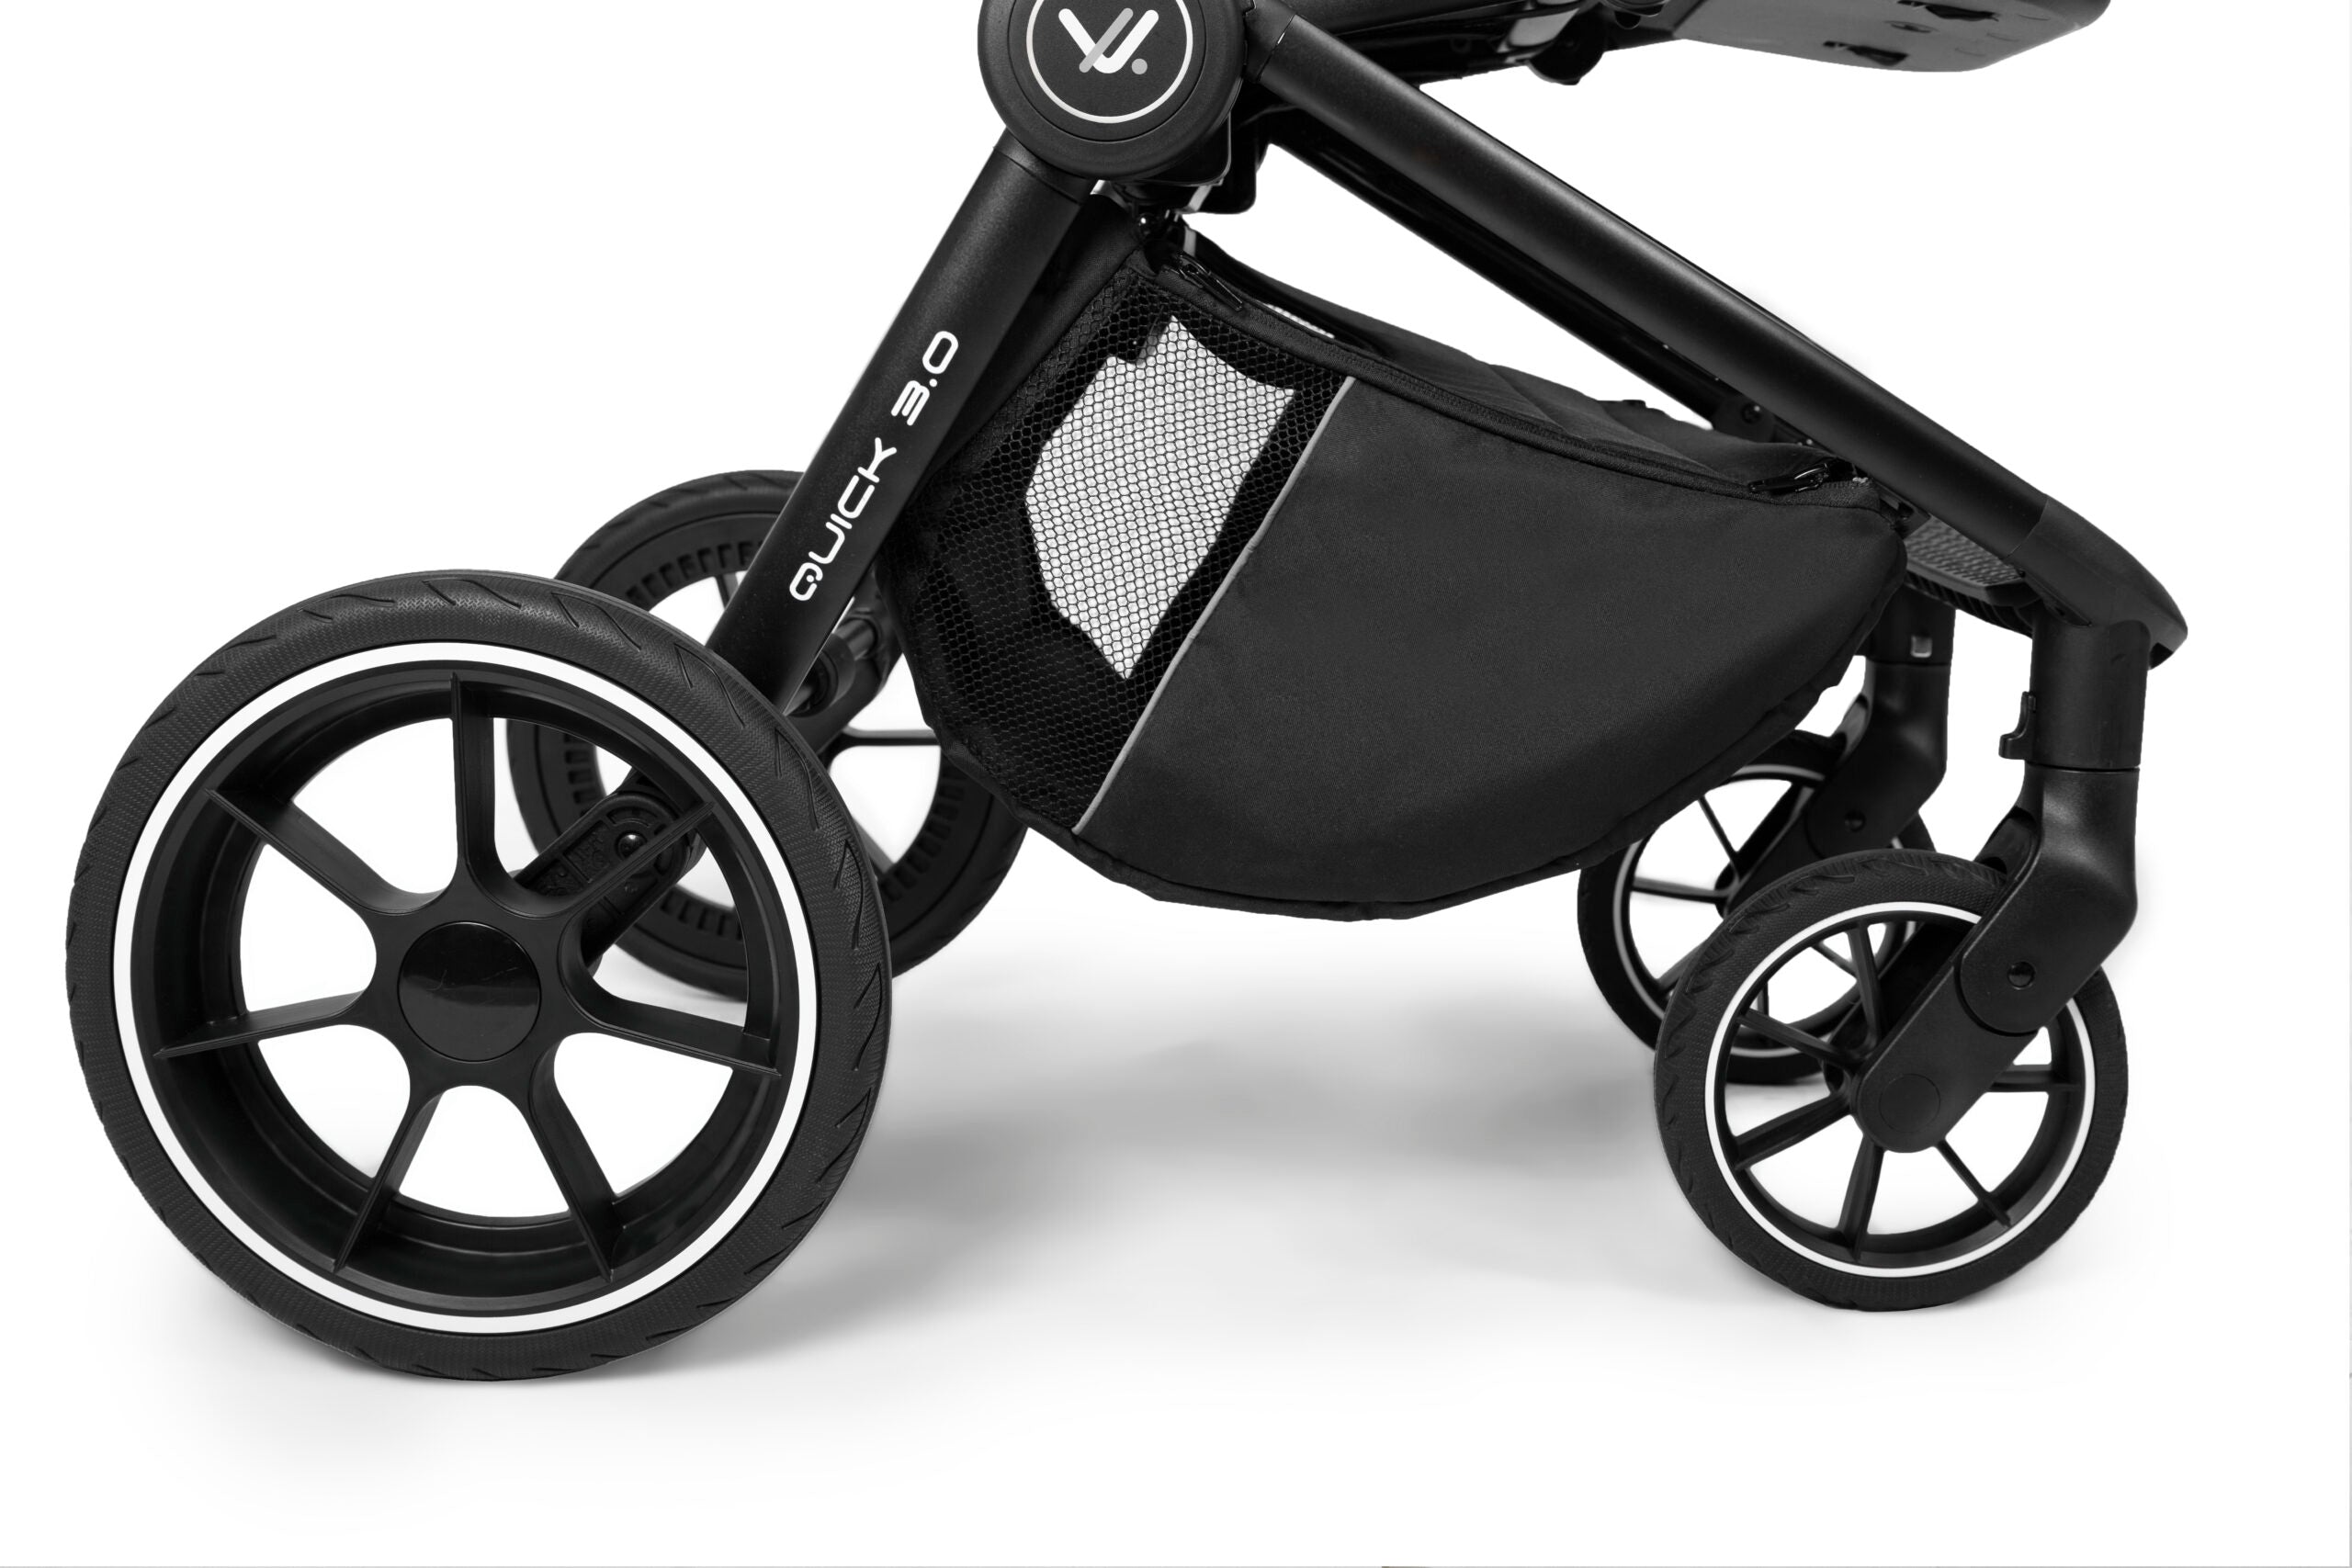 MUUVO Quick 3.0 baby stroller 2 in 1, carry cot and seat stroller, color Iron Graphite